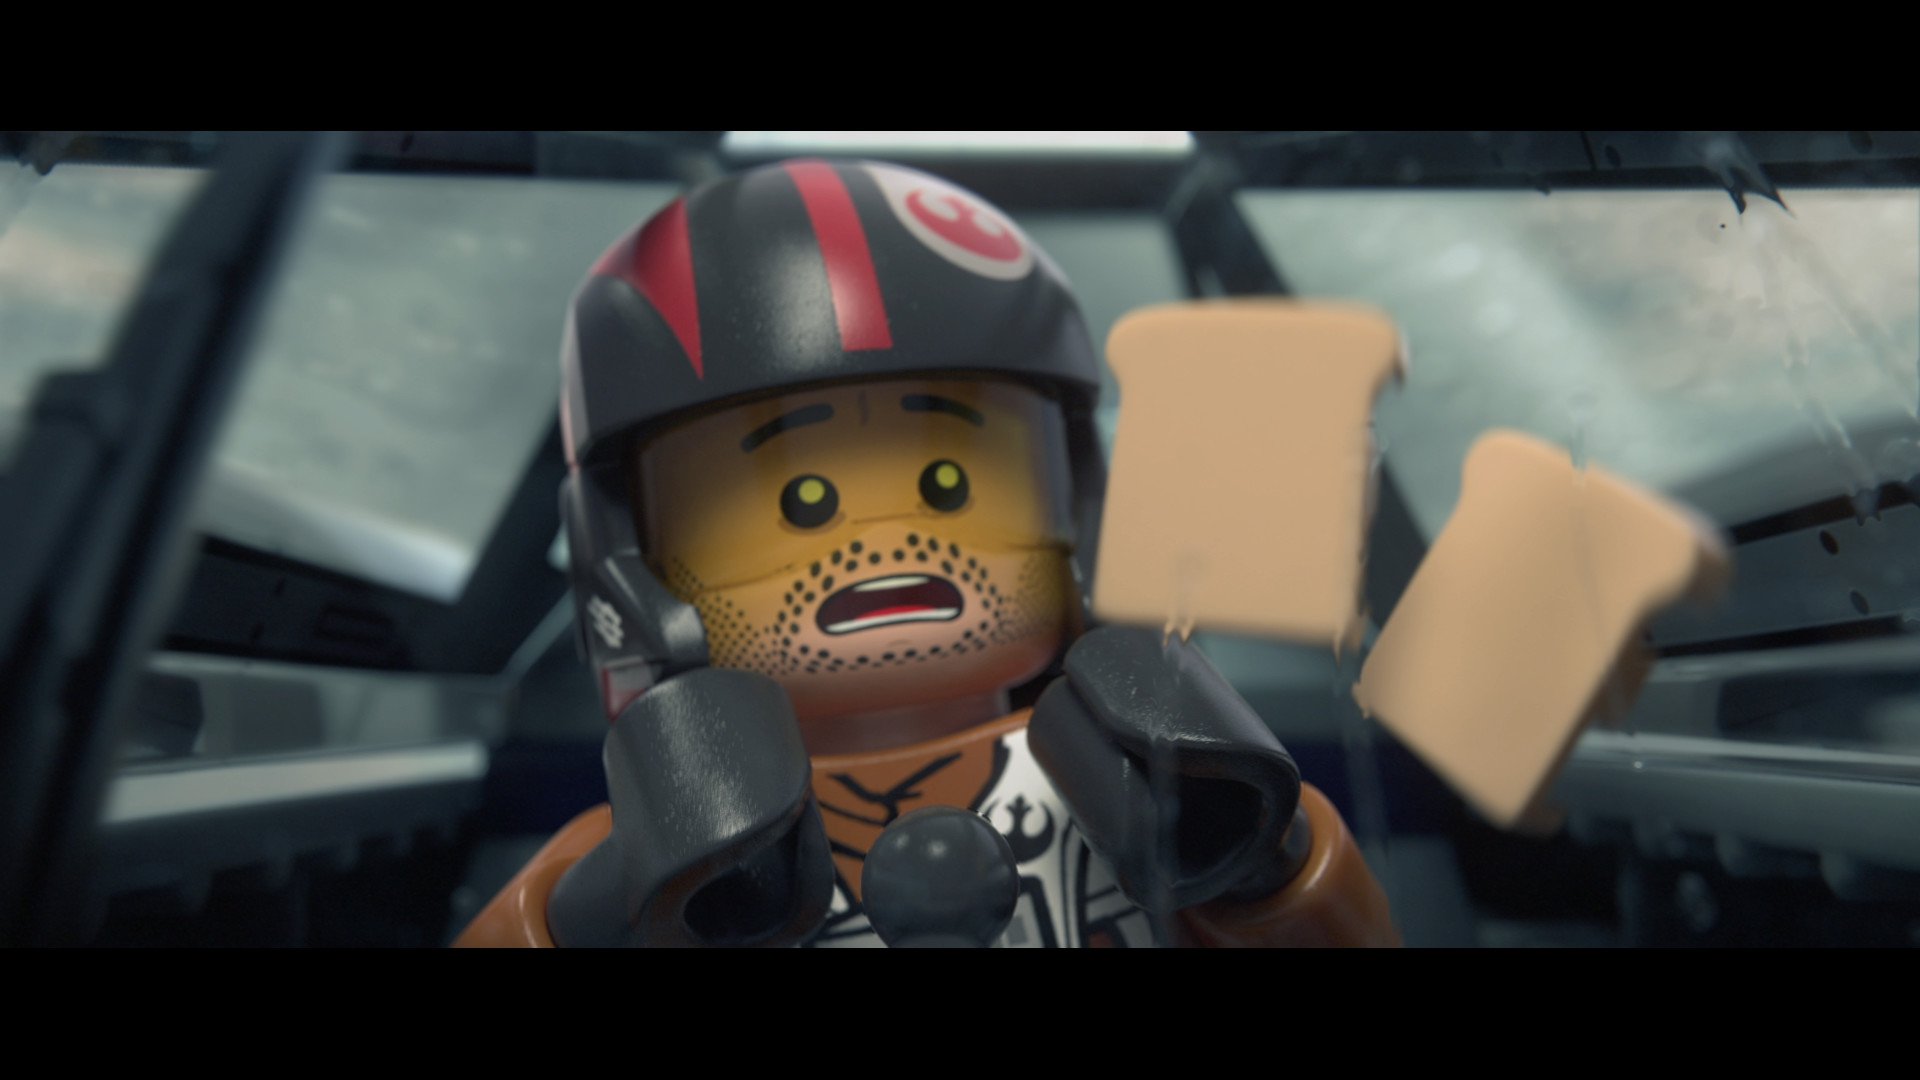 LEGO Star Wars The Force Awakens Deluxe Edition 7